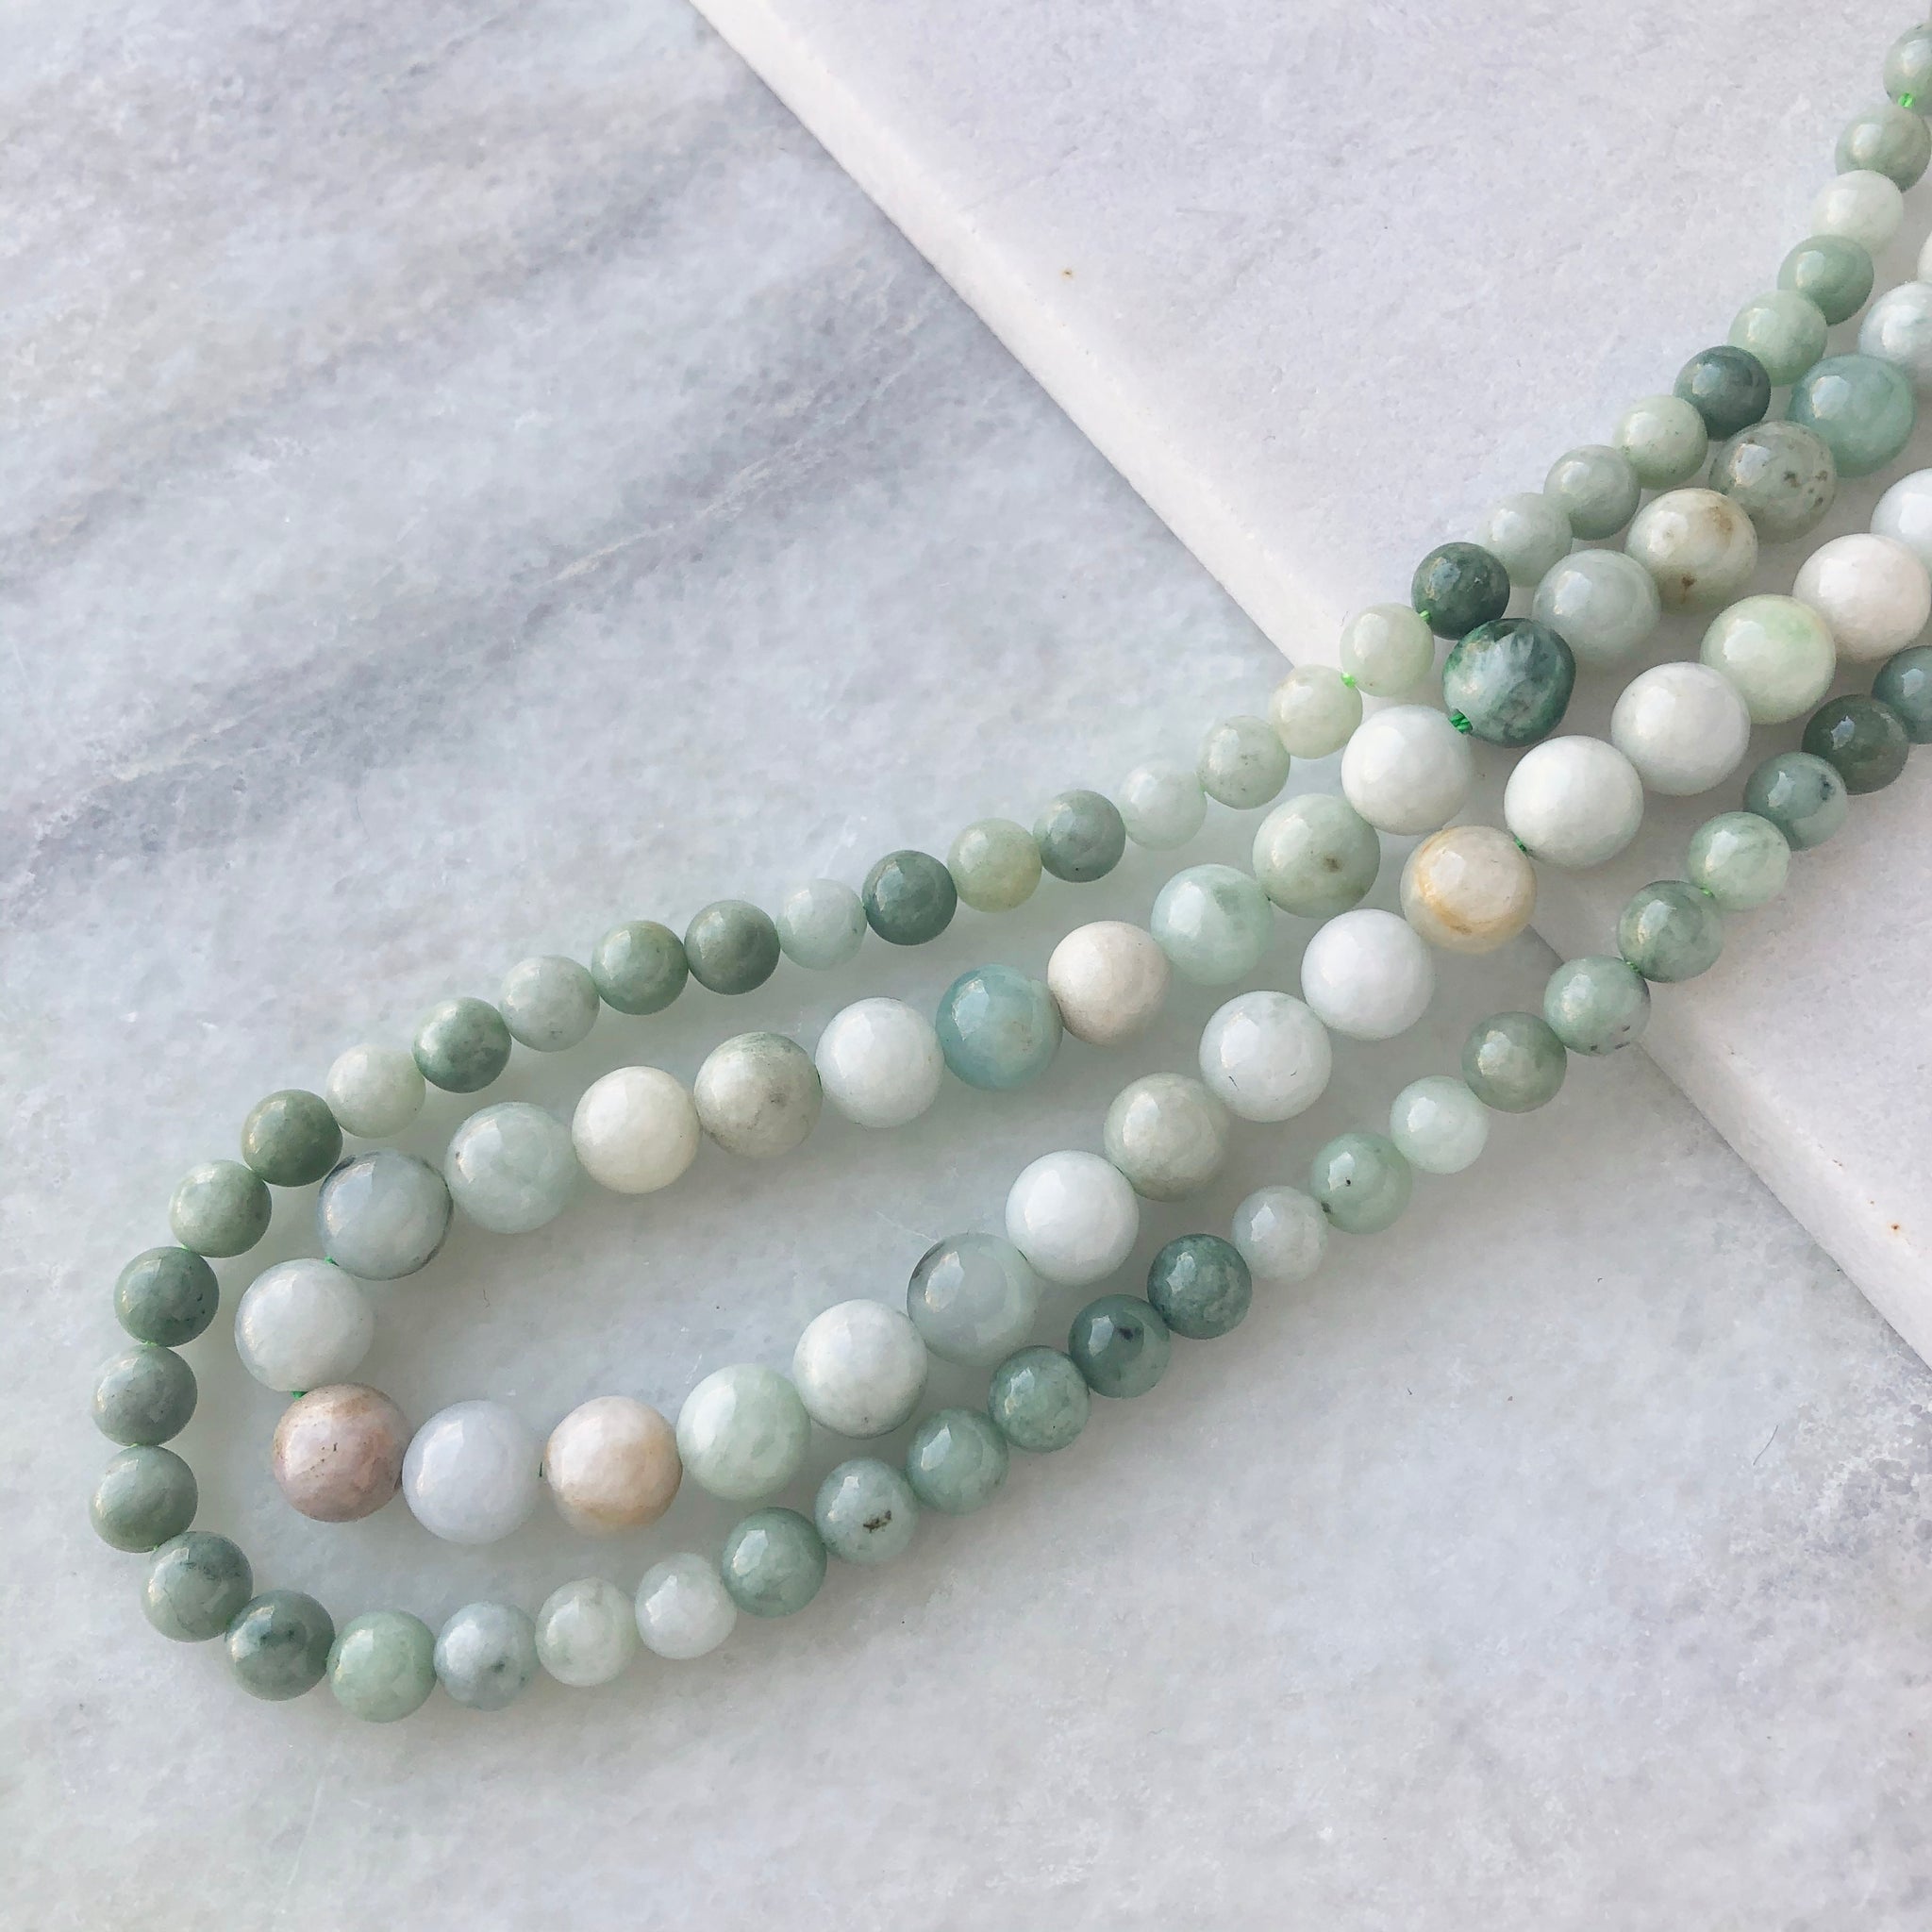 90.8g 14KYG PALE GREEN JADE & APPROX. 0.21CTW DIAMOND BEADED NECKLACE 31  INCH - Hawaii Estate & Jewelry Buyers